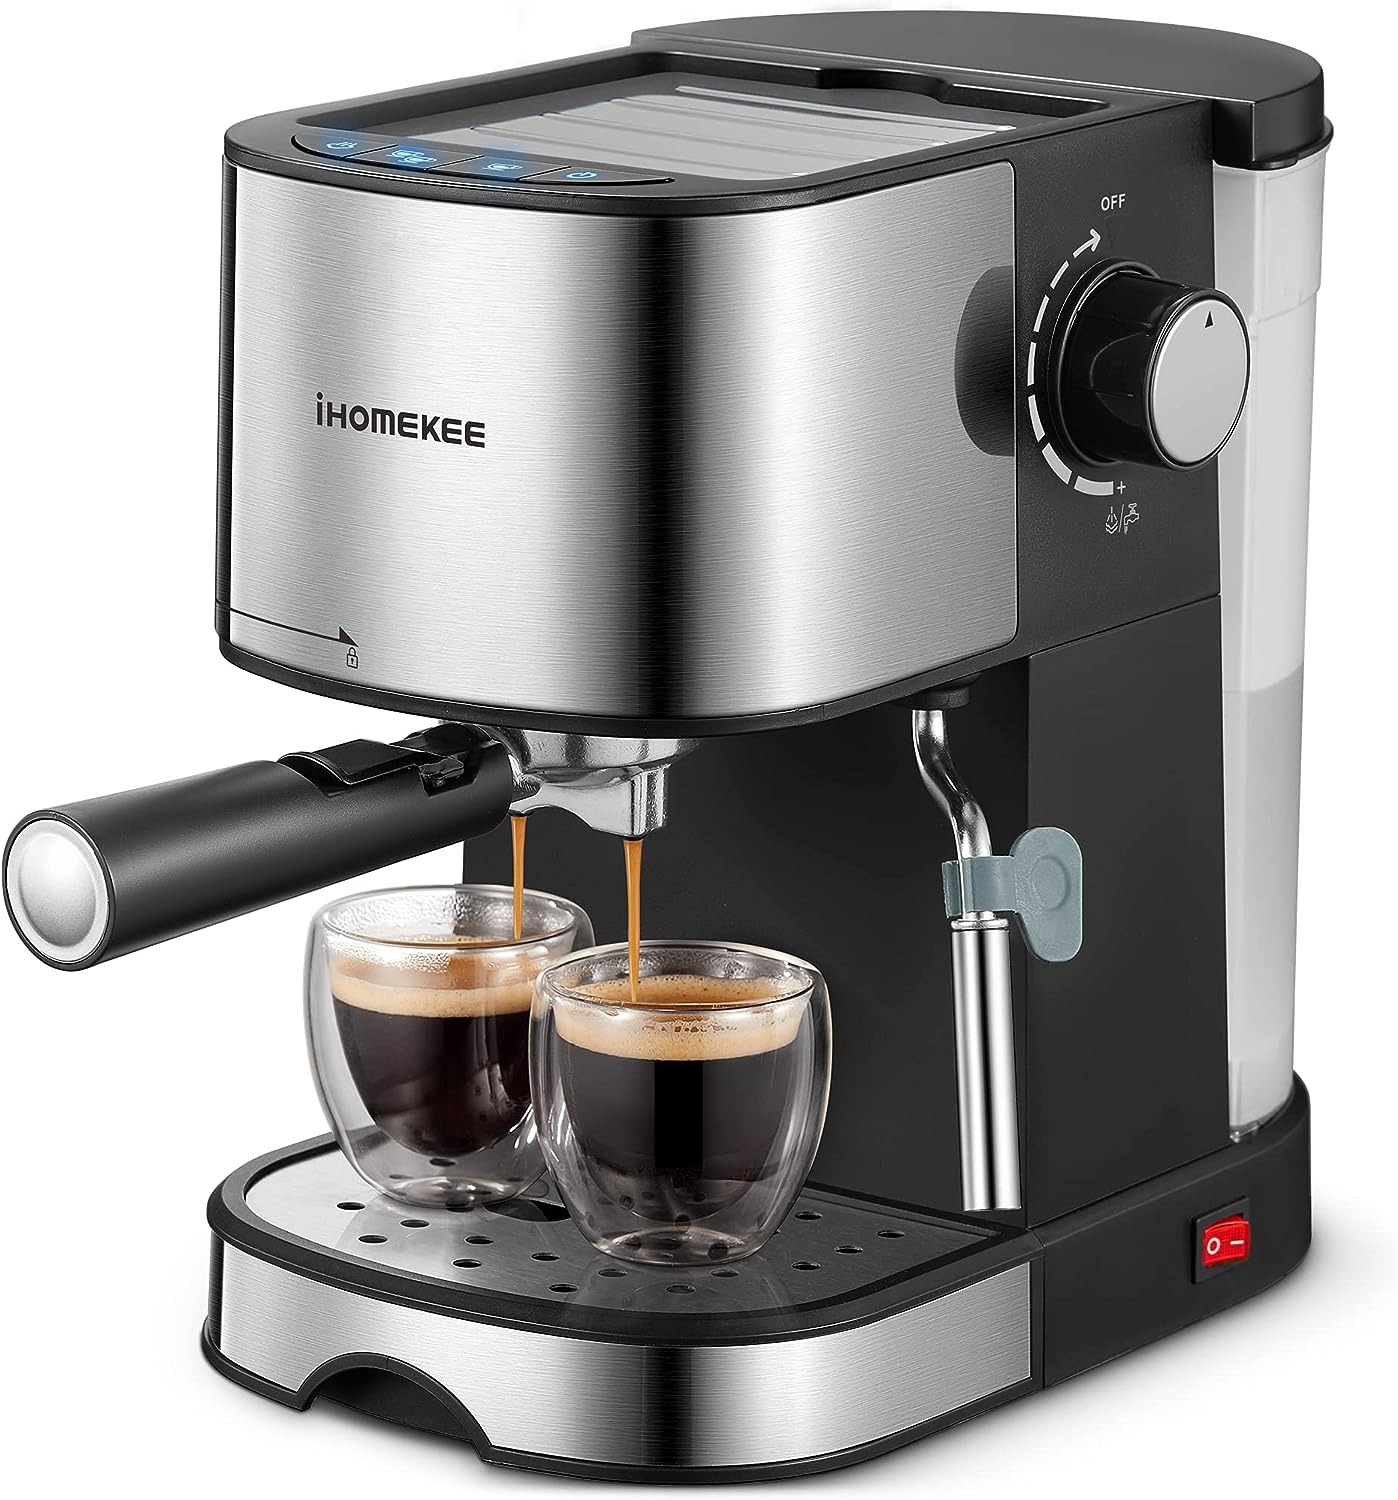 Ihomekee 15Bar Espresso Machine, Espresso Maker with Commercial Steamer for  Latte and Cappuccino, Expresso Coffee Machine with – Coffee Gear